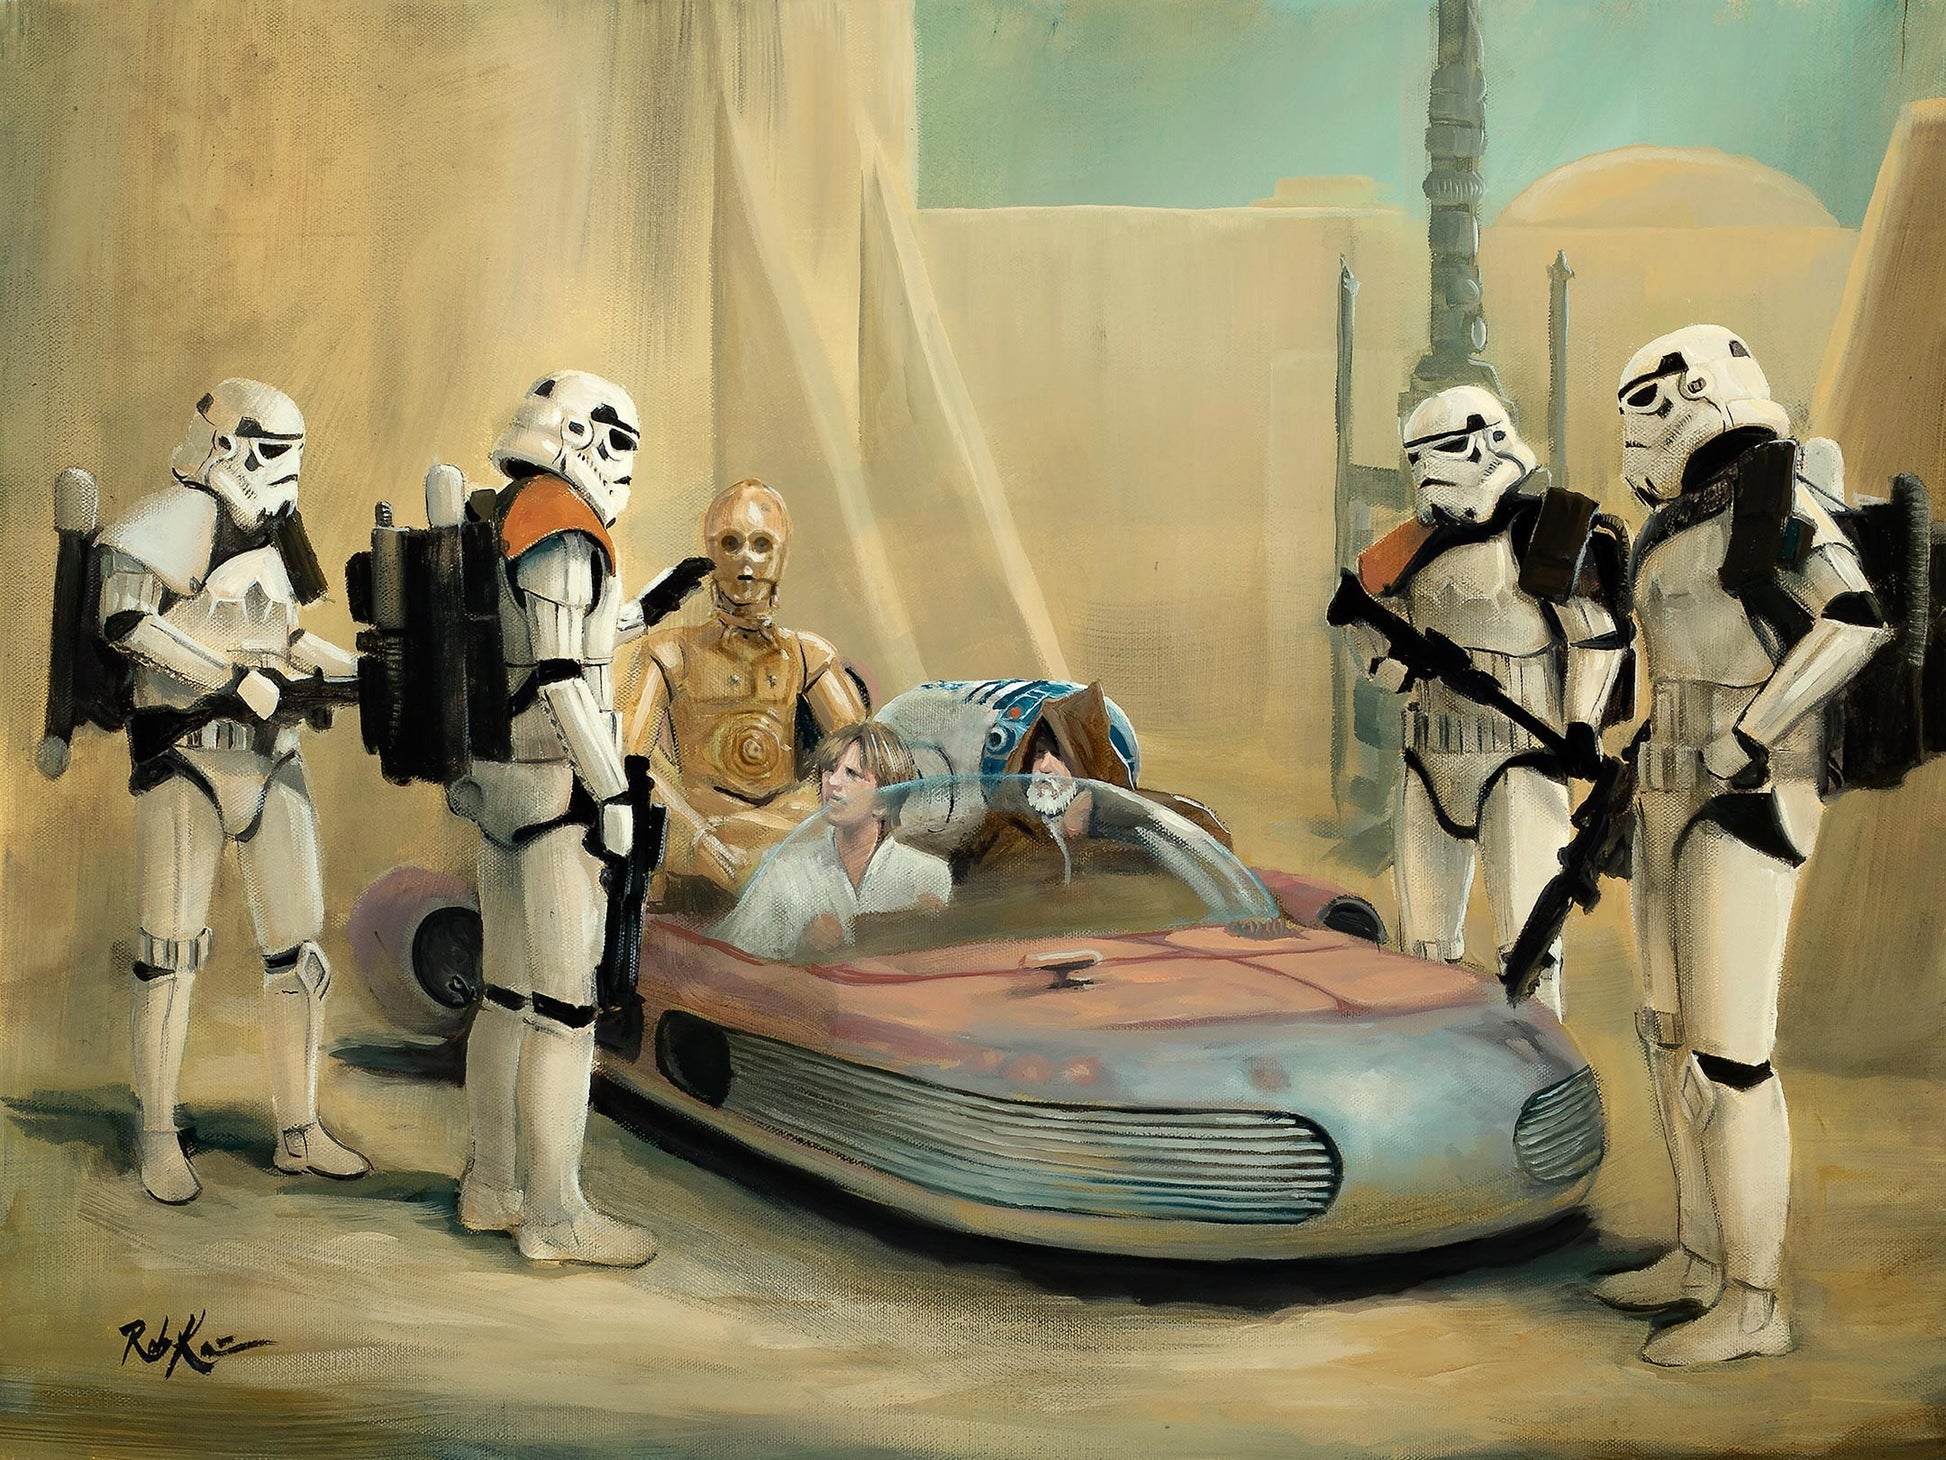 Rob Kaz Star Wars "Move Along" Limited Edition Canvas Giclee